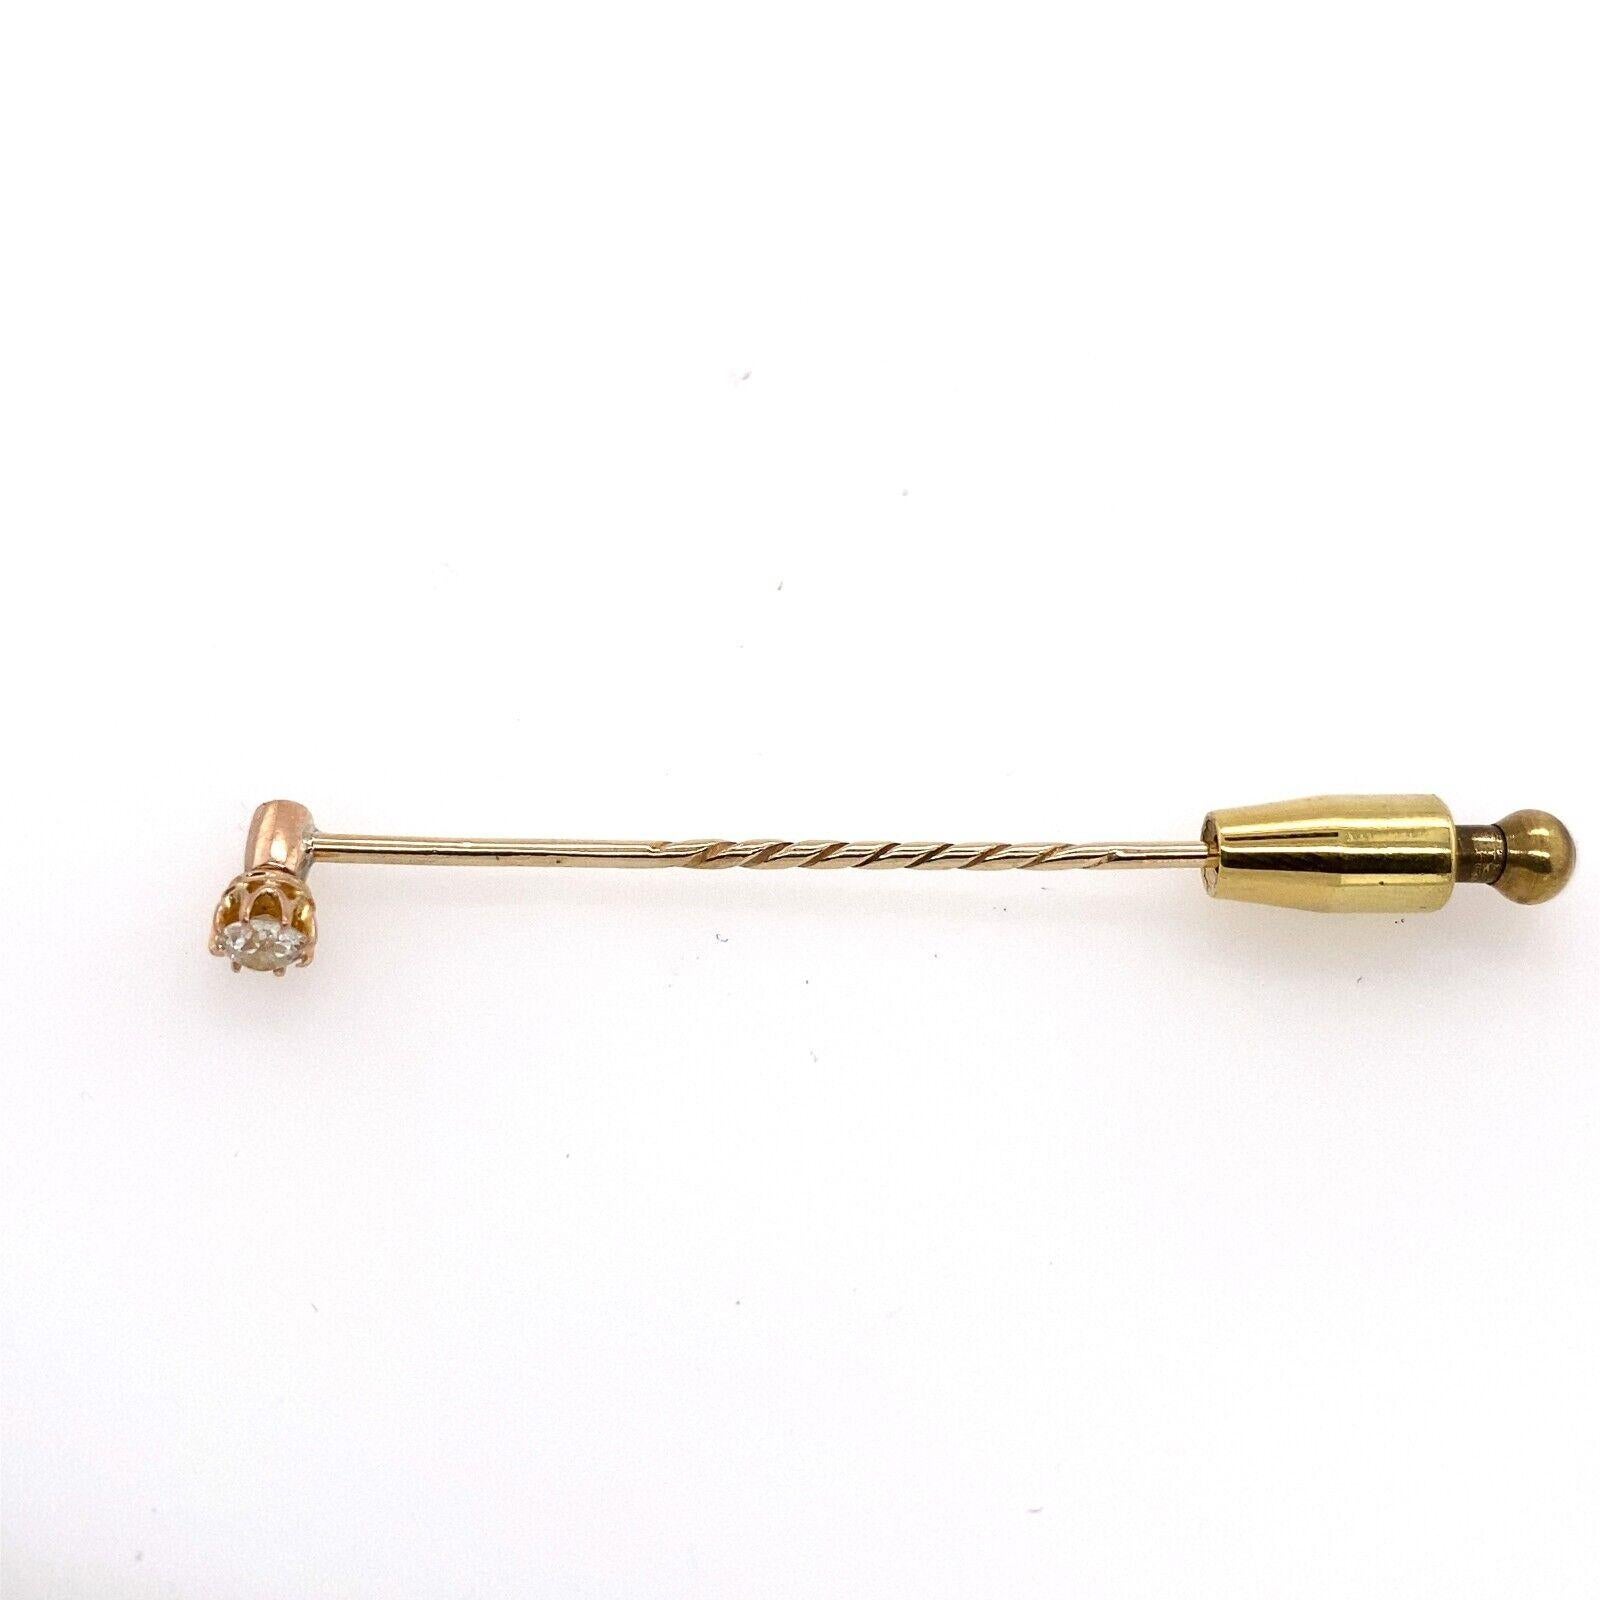 Antique 18ct Yellow & Rose Gold Stick Pin, Set With 0.25ct Victorian Cut Diamond

This elegant Victorian cut Diamond 0.25ct stickpin in 18ct Rose Gold with 9ct Yellow Gold pin. It's a timeless piece that can be kept in your wardrobe and worn on